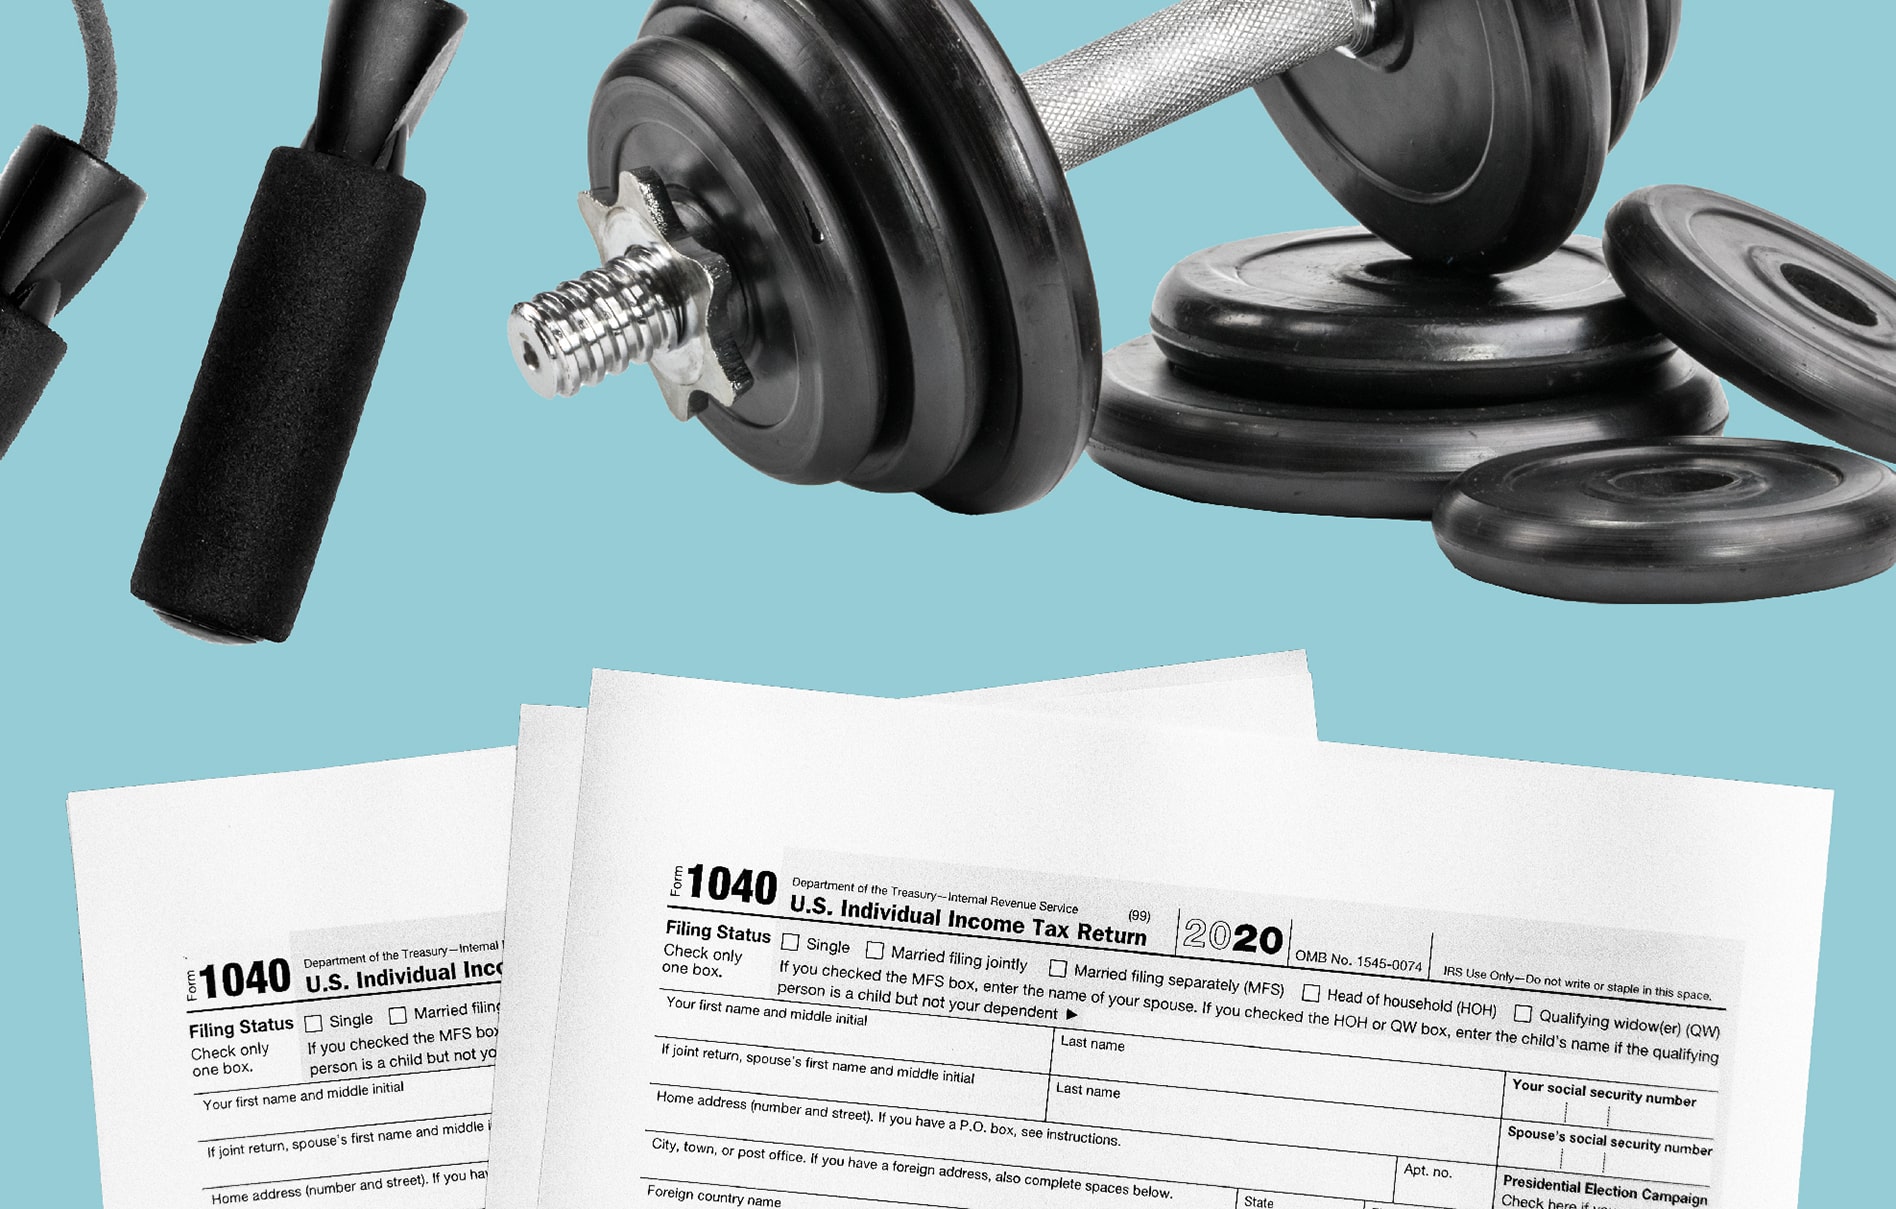 Tax forms and fitness equipment